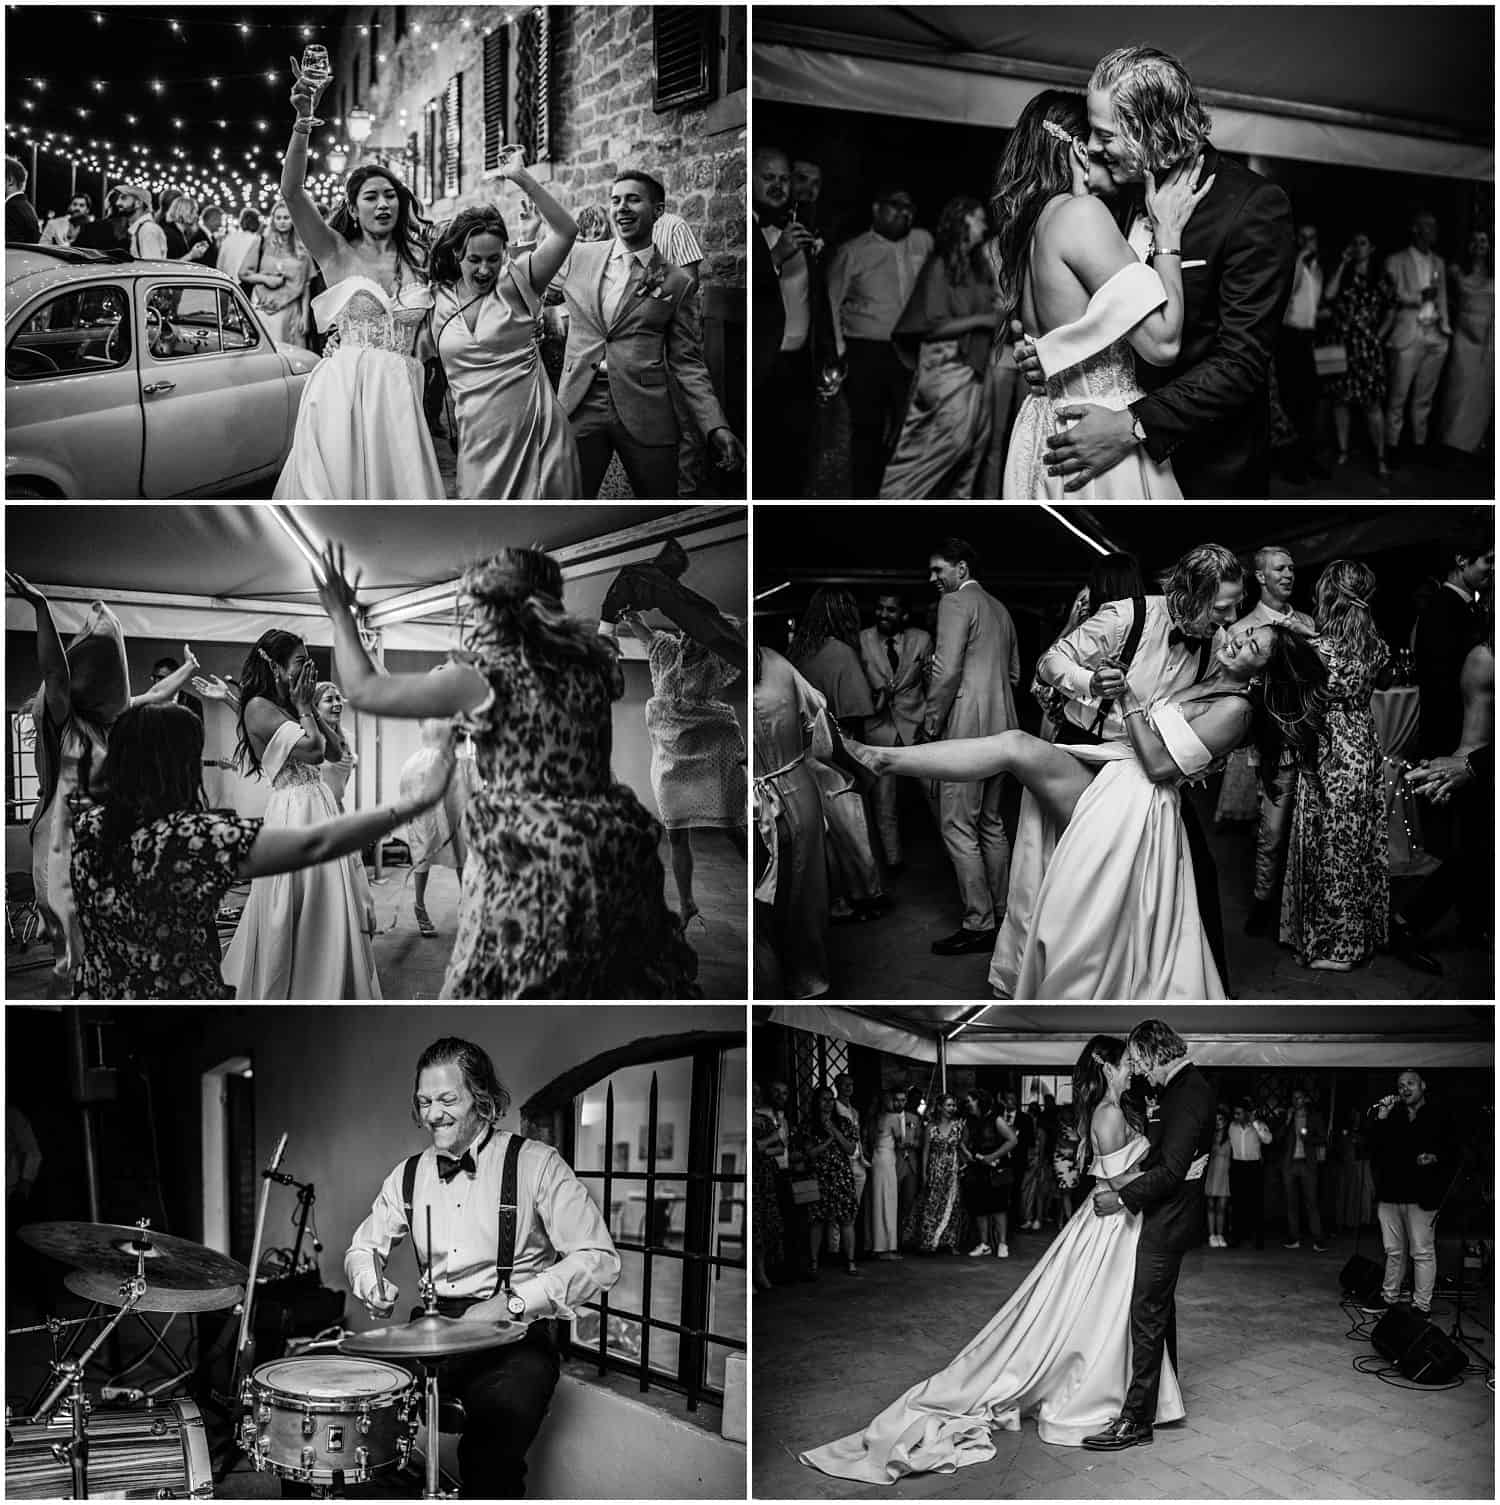 Pictures of a wedding party by night in a tuscany wedding in Italy.